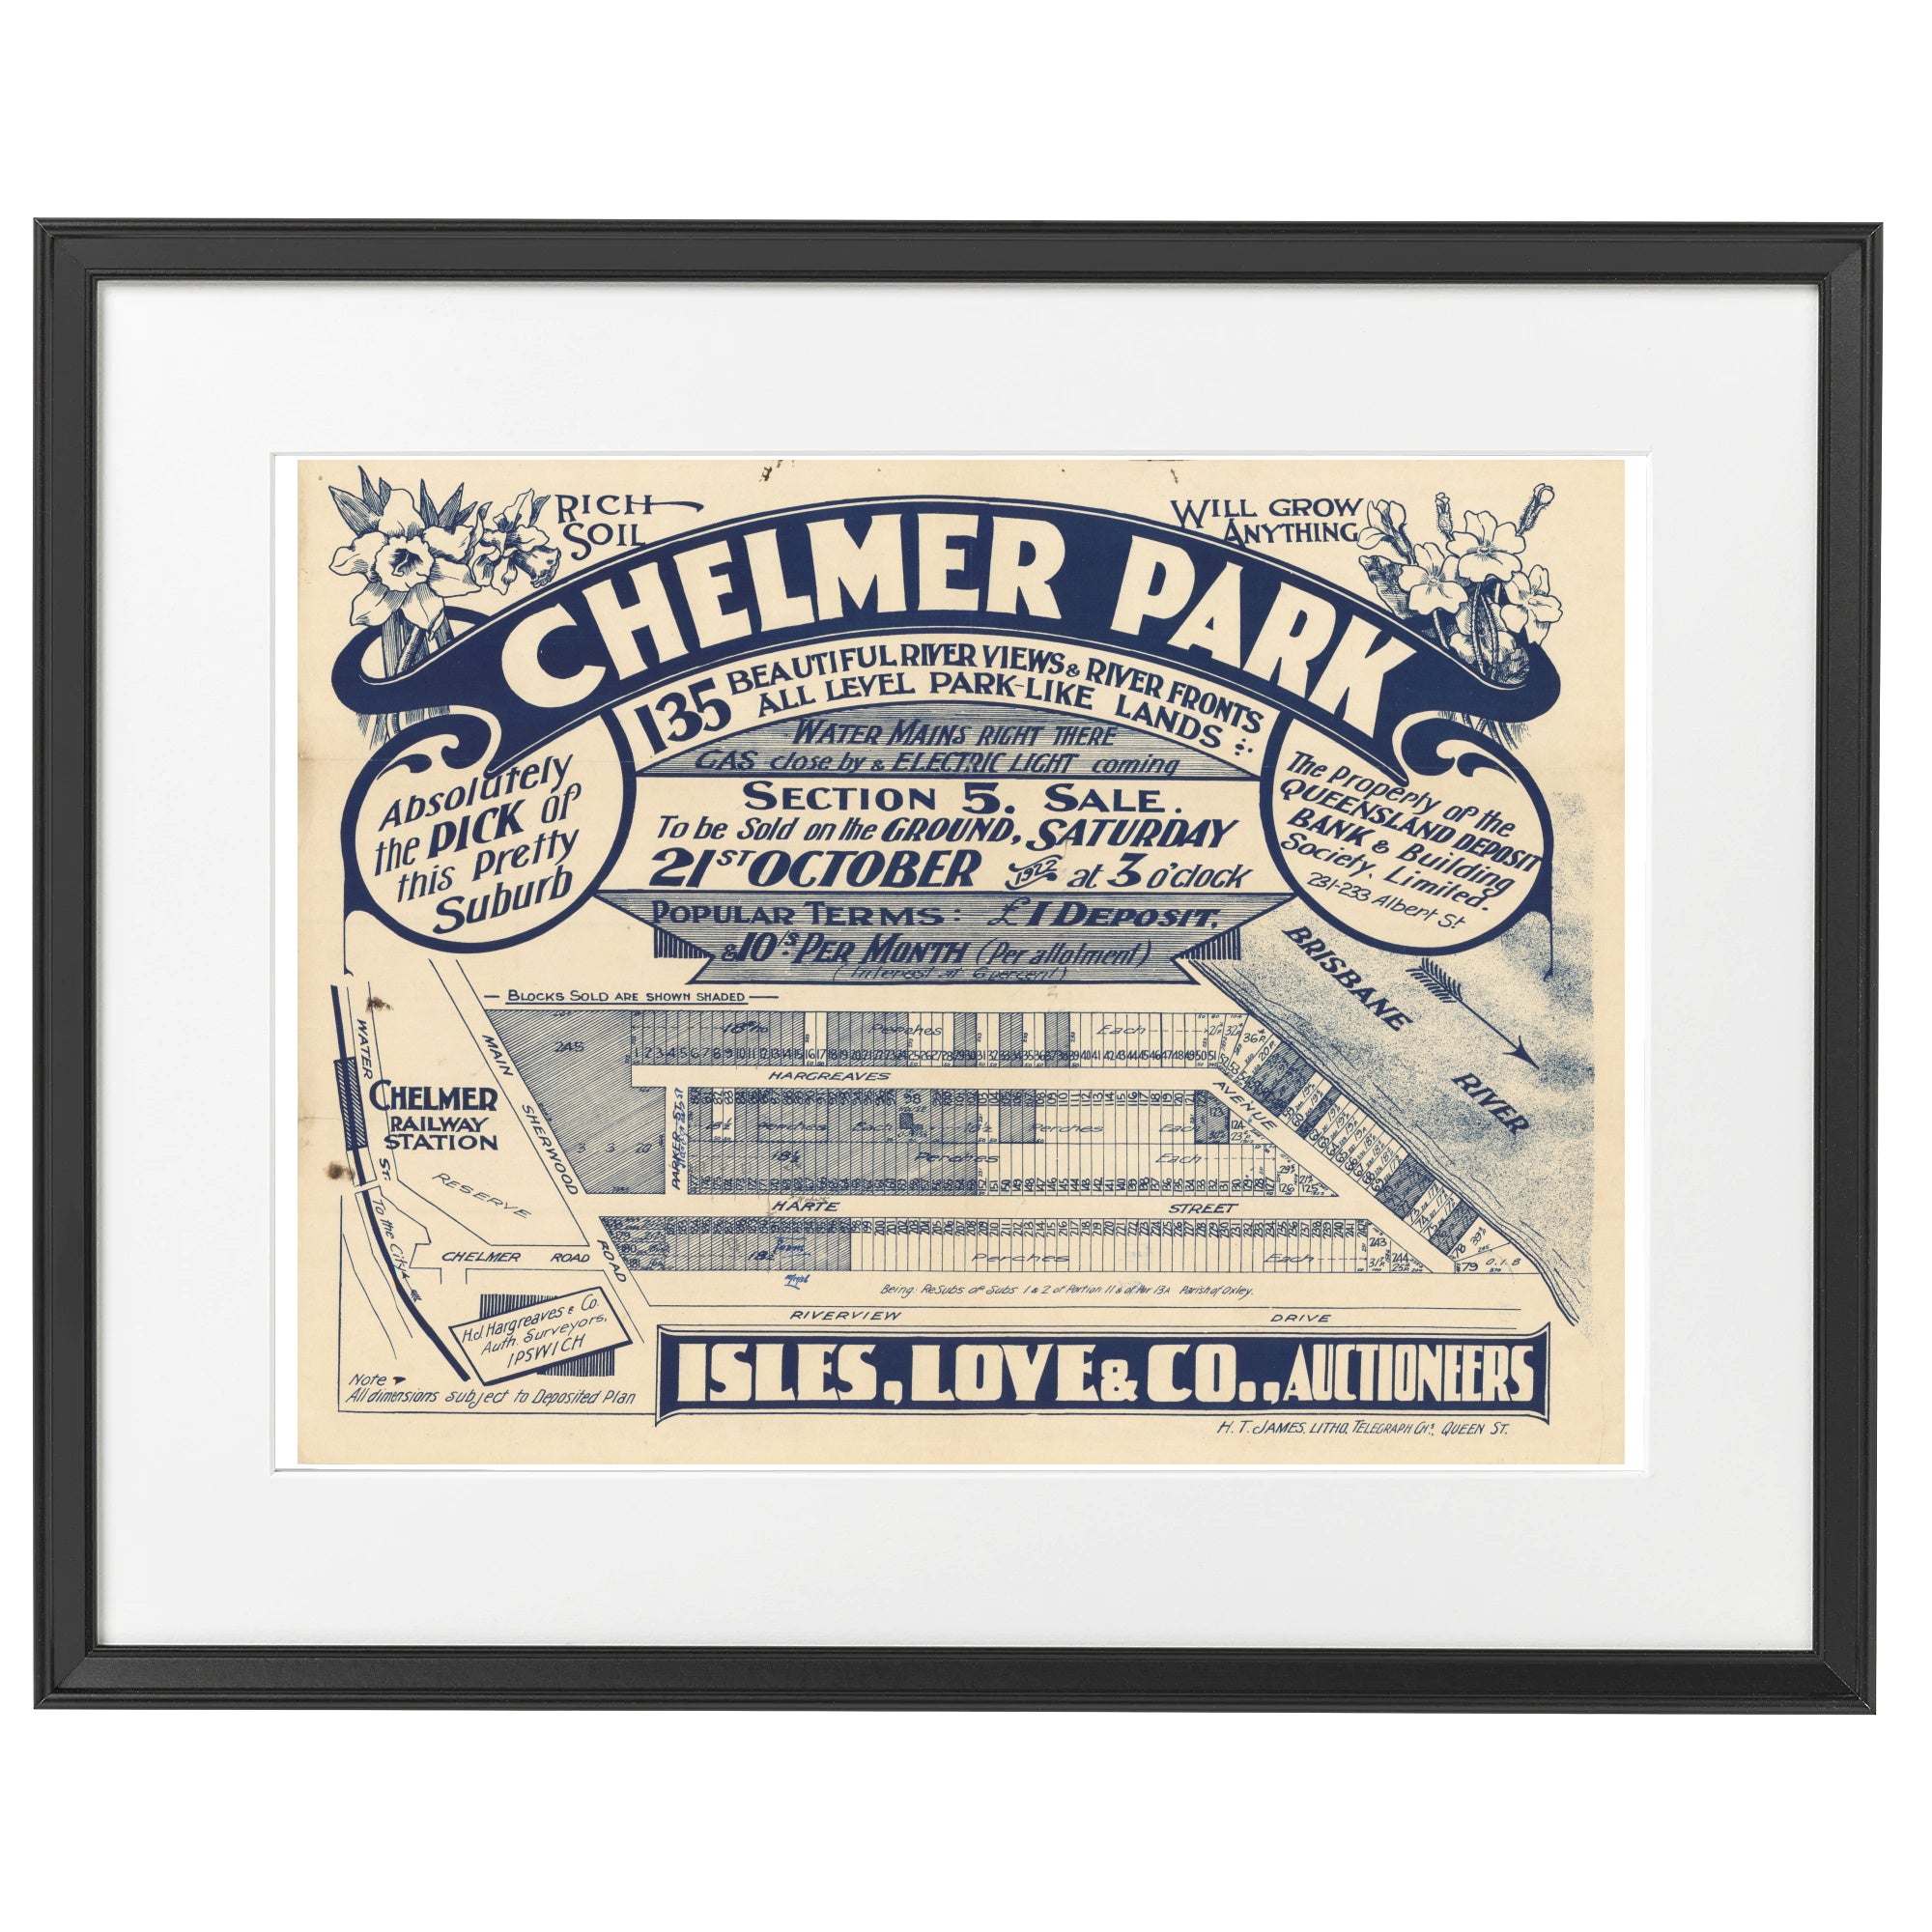 1922 Chelmer Park - 101 years ago today